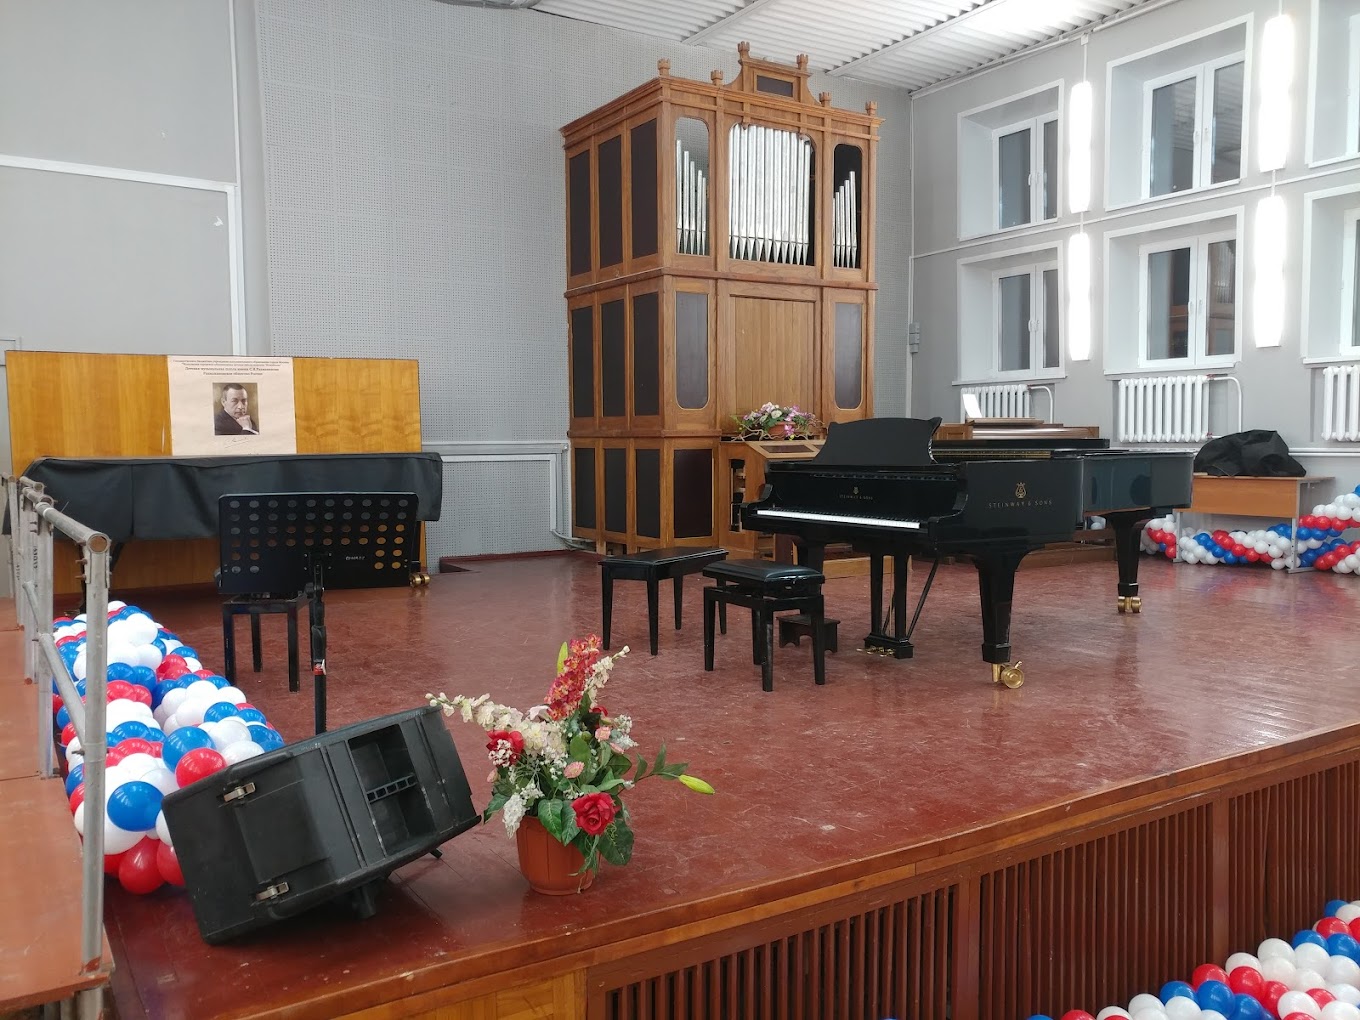 Music School named after Rachmaninoff